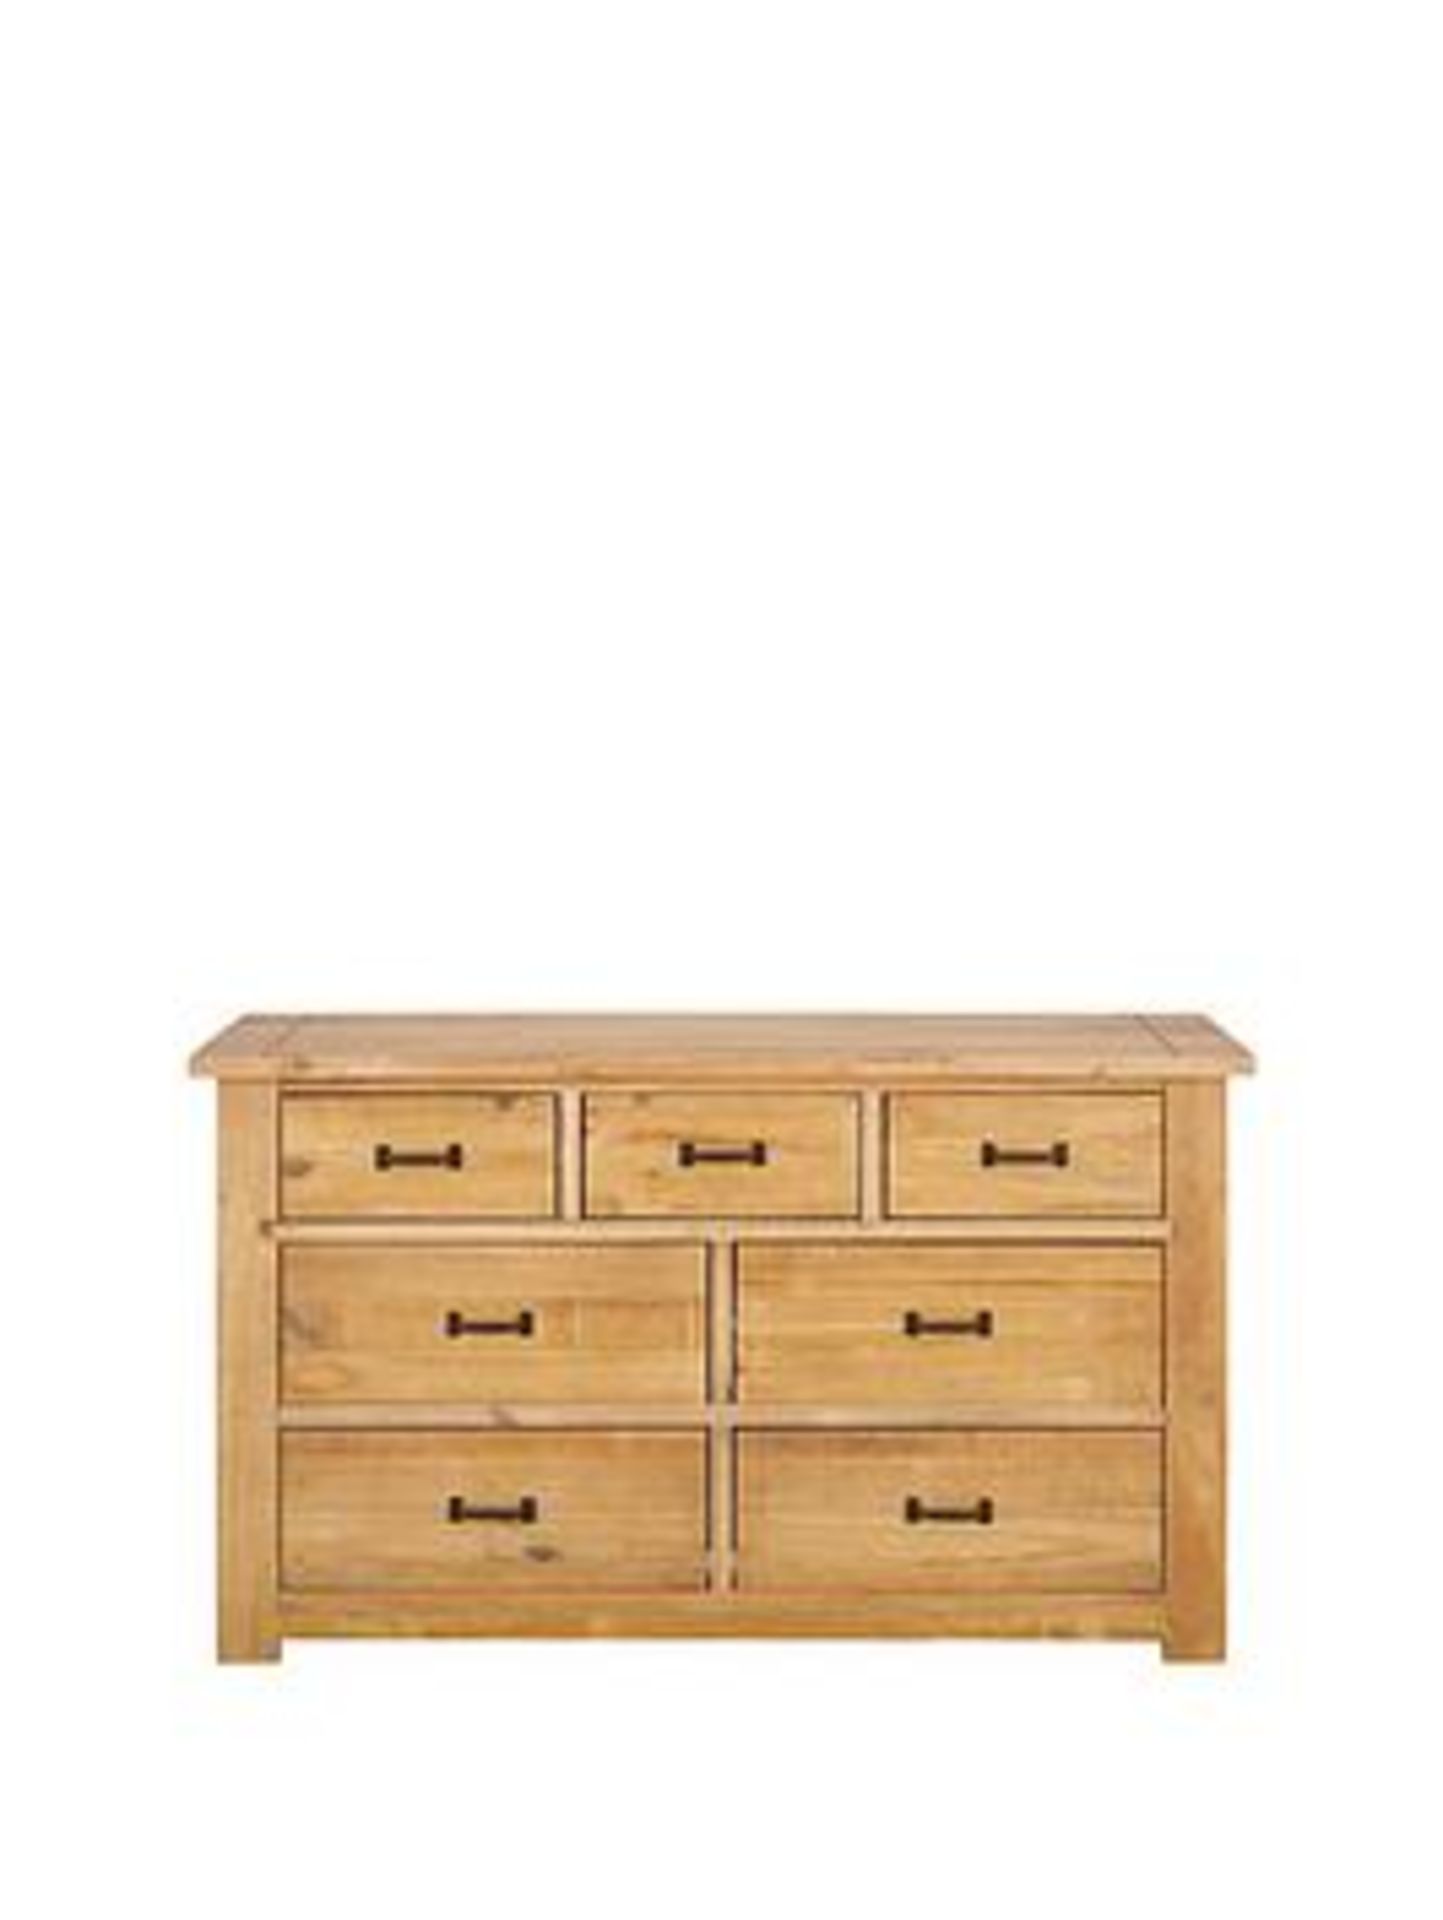 Boxed Item Albion Pine 3Pc Bedroom Set [Rustic Pine] Rrp ¬£1273 - Image 3 of 4